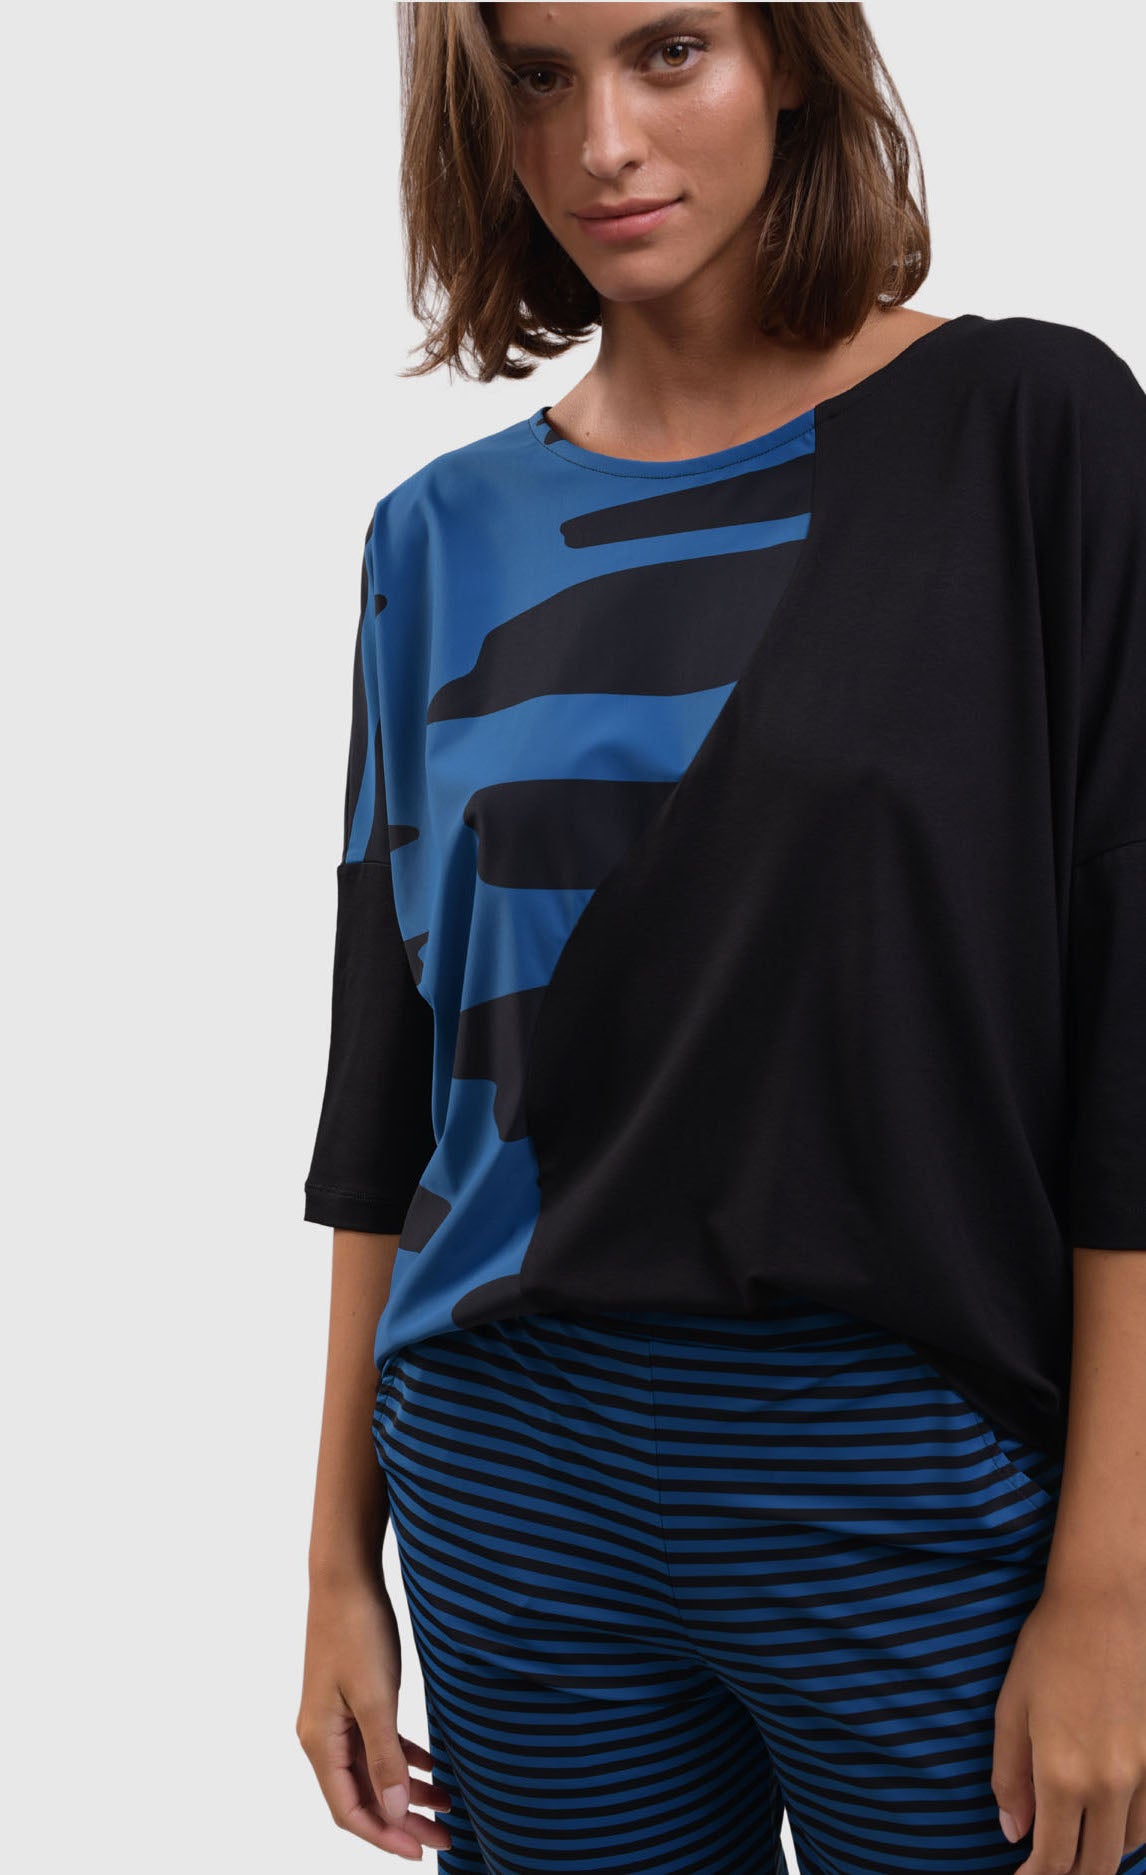 Front close up view of a woman wearing blue and black striped pants and the alembika tekbika ocean wave top. This top is black with a right sides wave paneling design in blue. The top as a scoop neck and drop shoulder, 3/4 length sleeves.